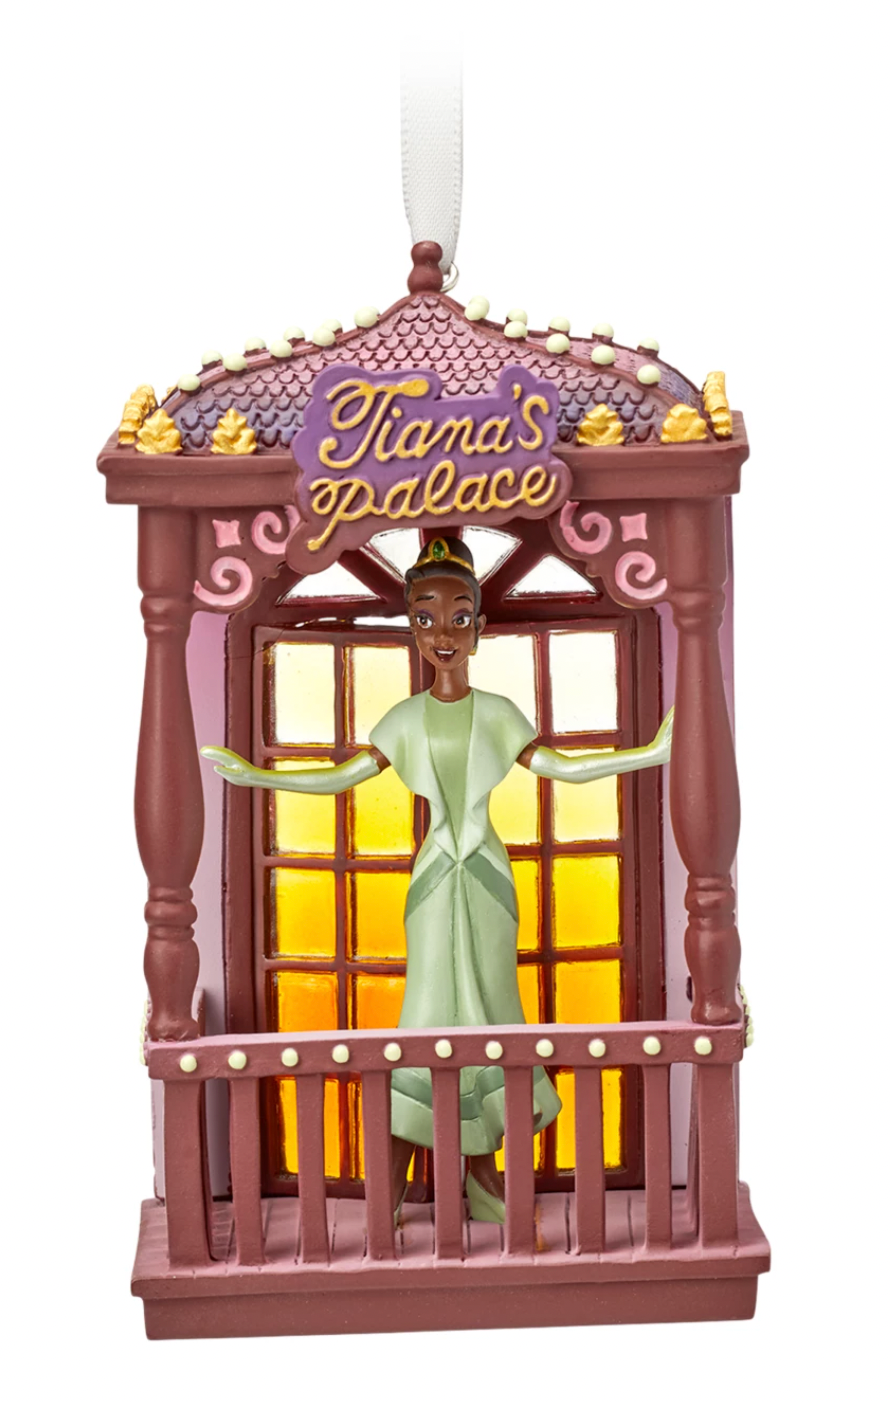 Disney Sketchbook Tiana Fairytale Christmas Ornament Princess and the Frog New